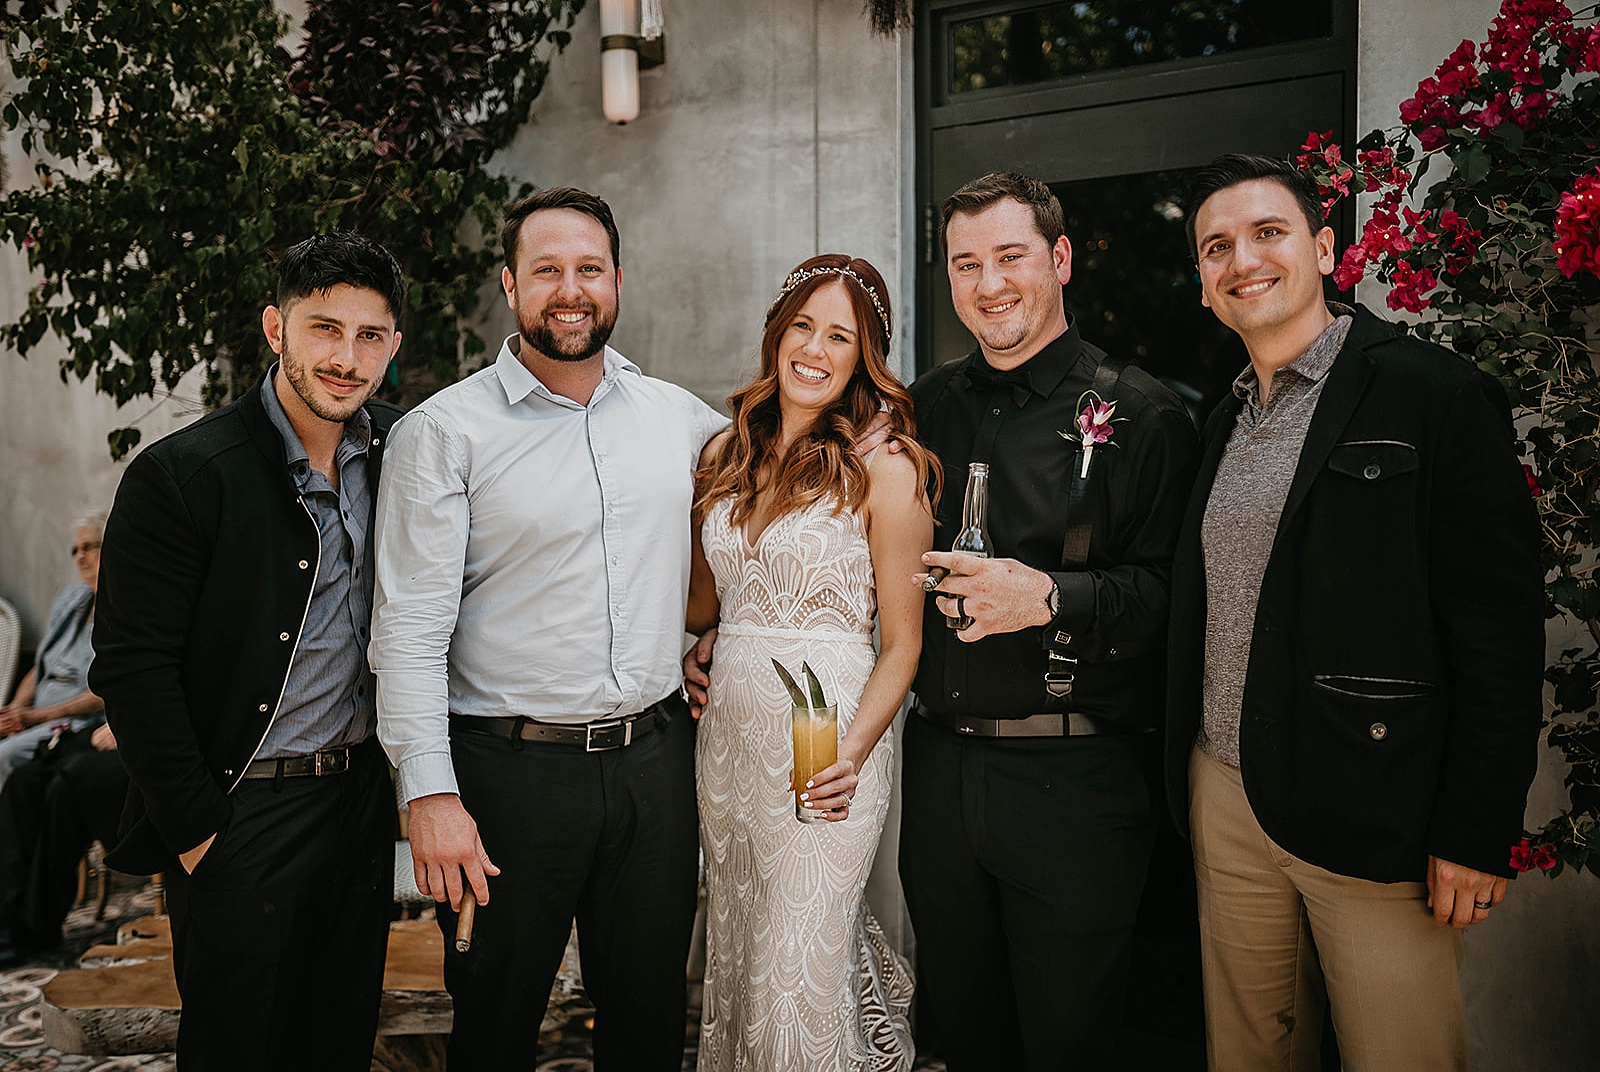 The Wilder Wedding captured by South Florida wedding photographer, Krystal Capone Photography